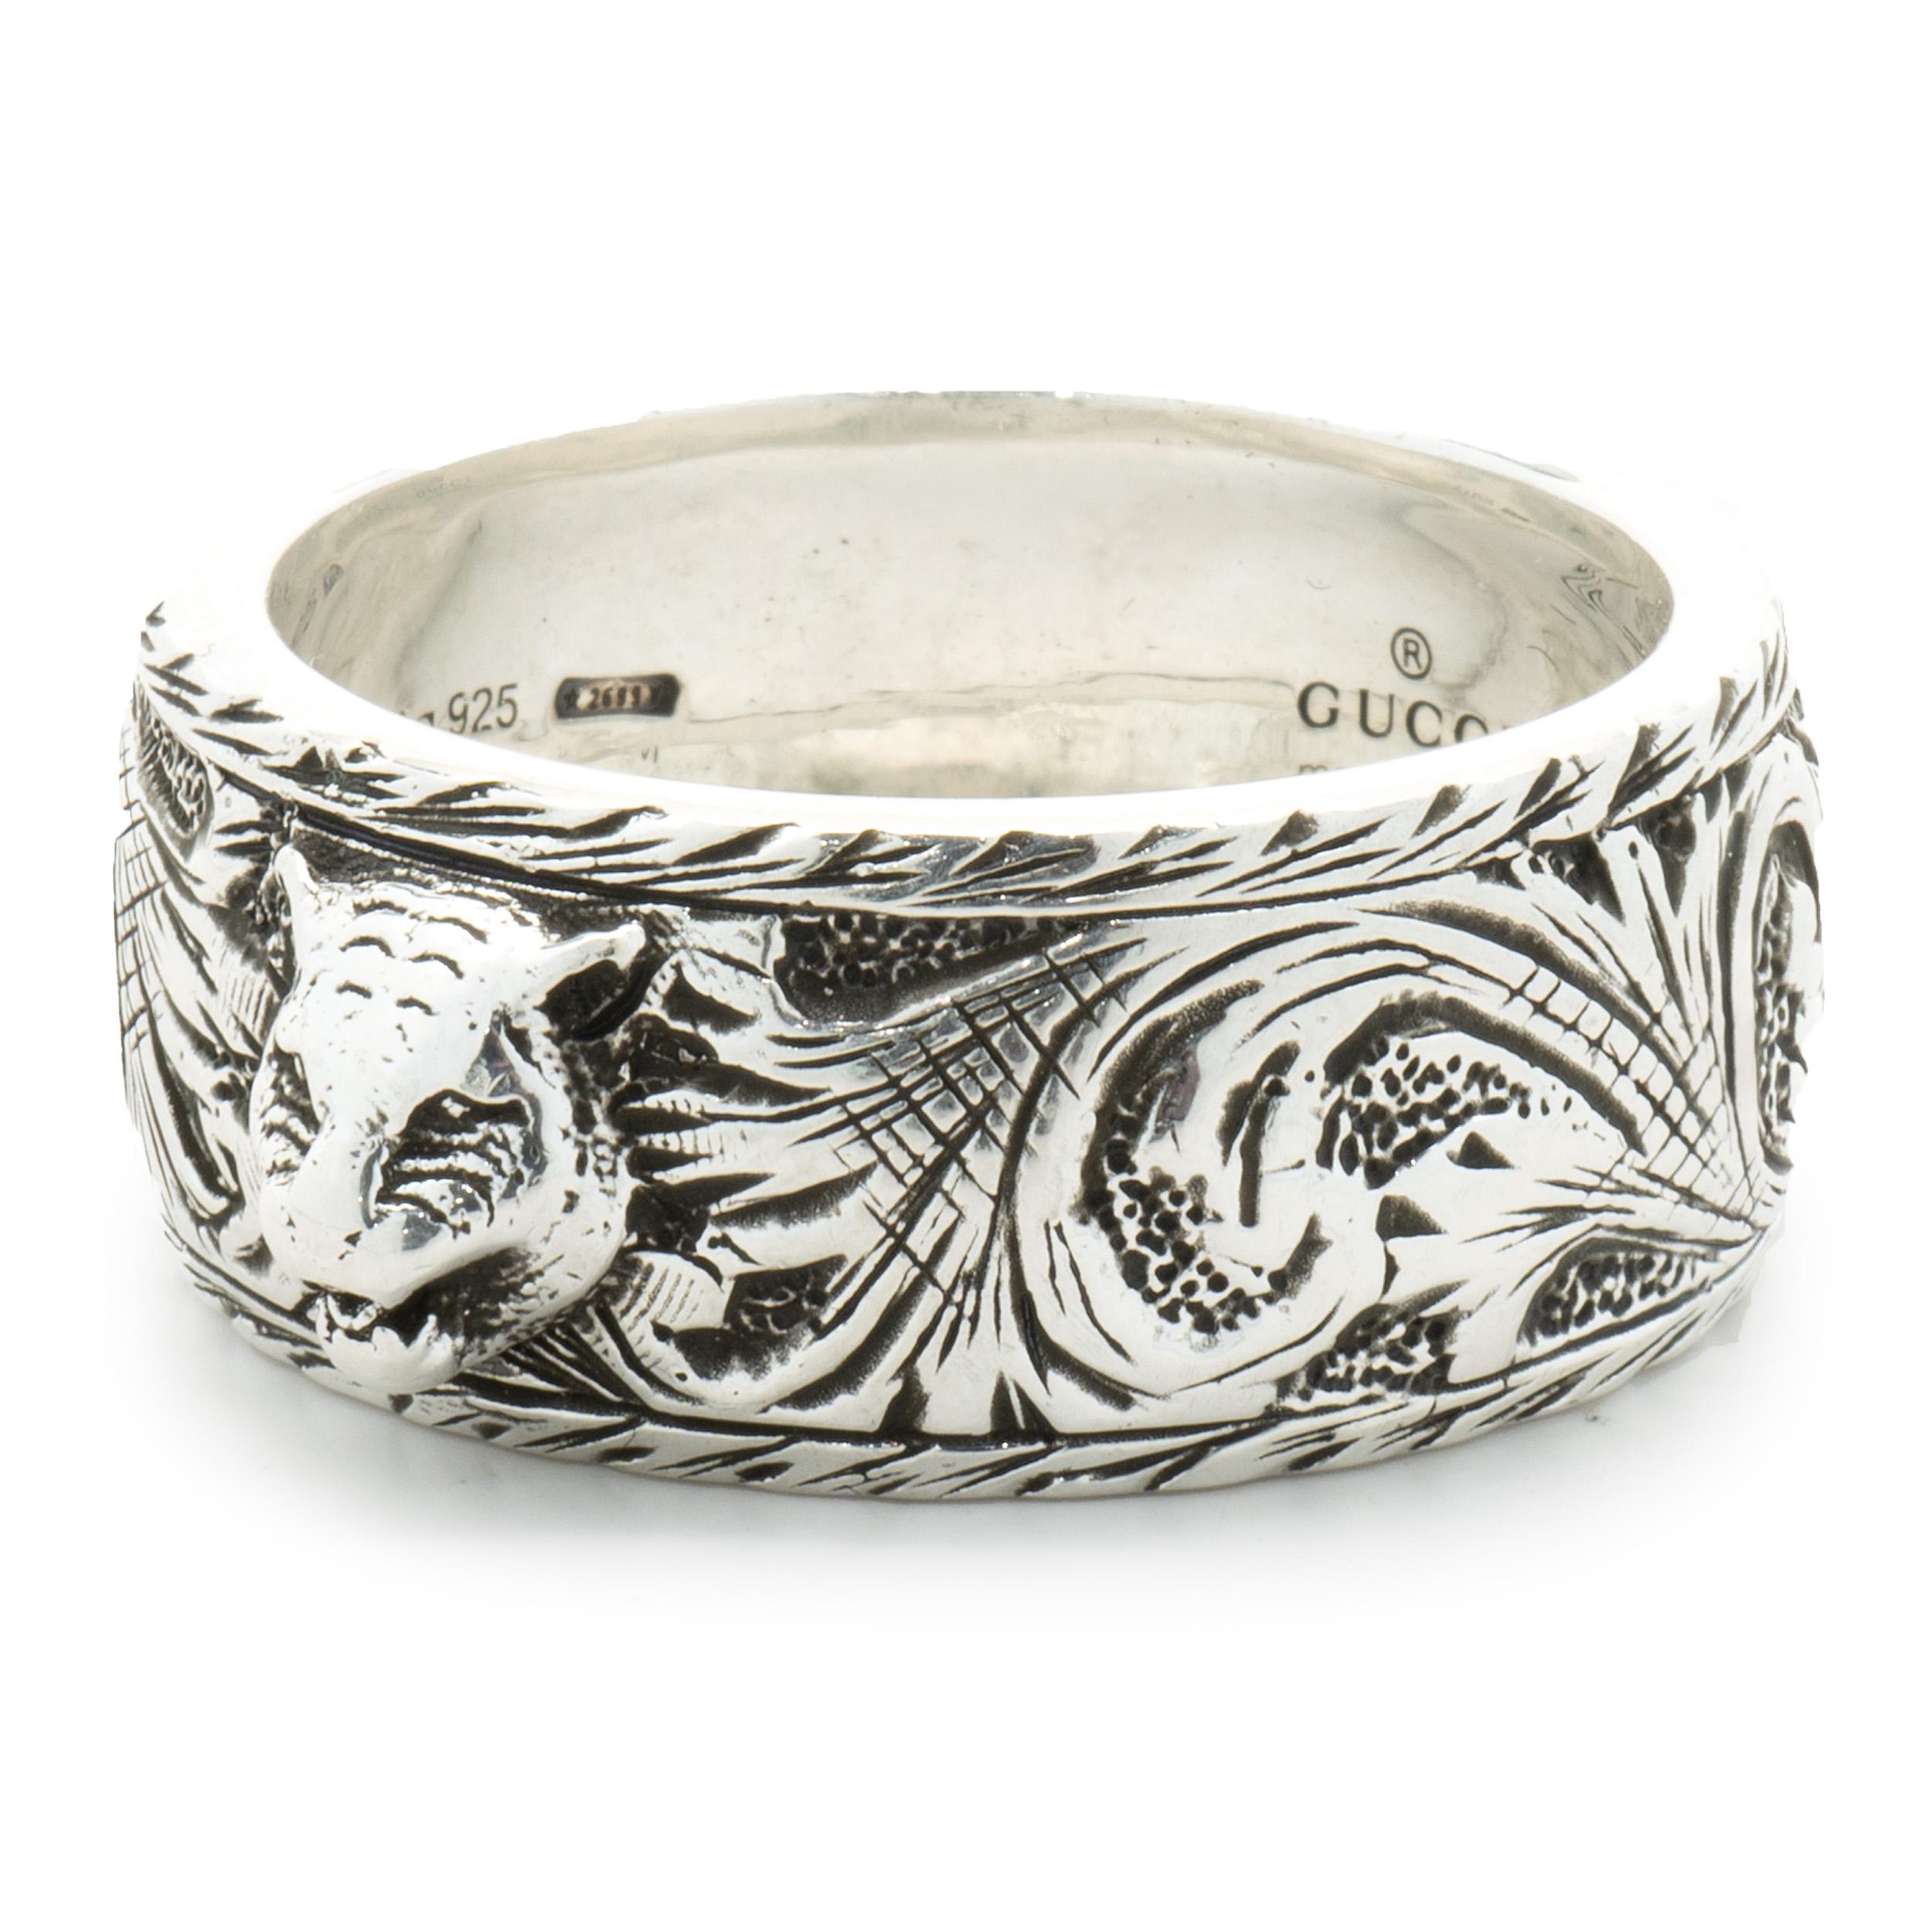 Designer: Gucci
Material: sterling silver
Dimensions: band measures 10mm wide
Weight: 11.58 grams
Size: 10
